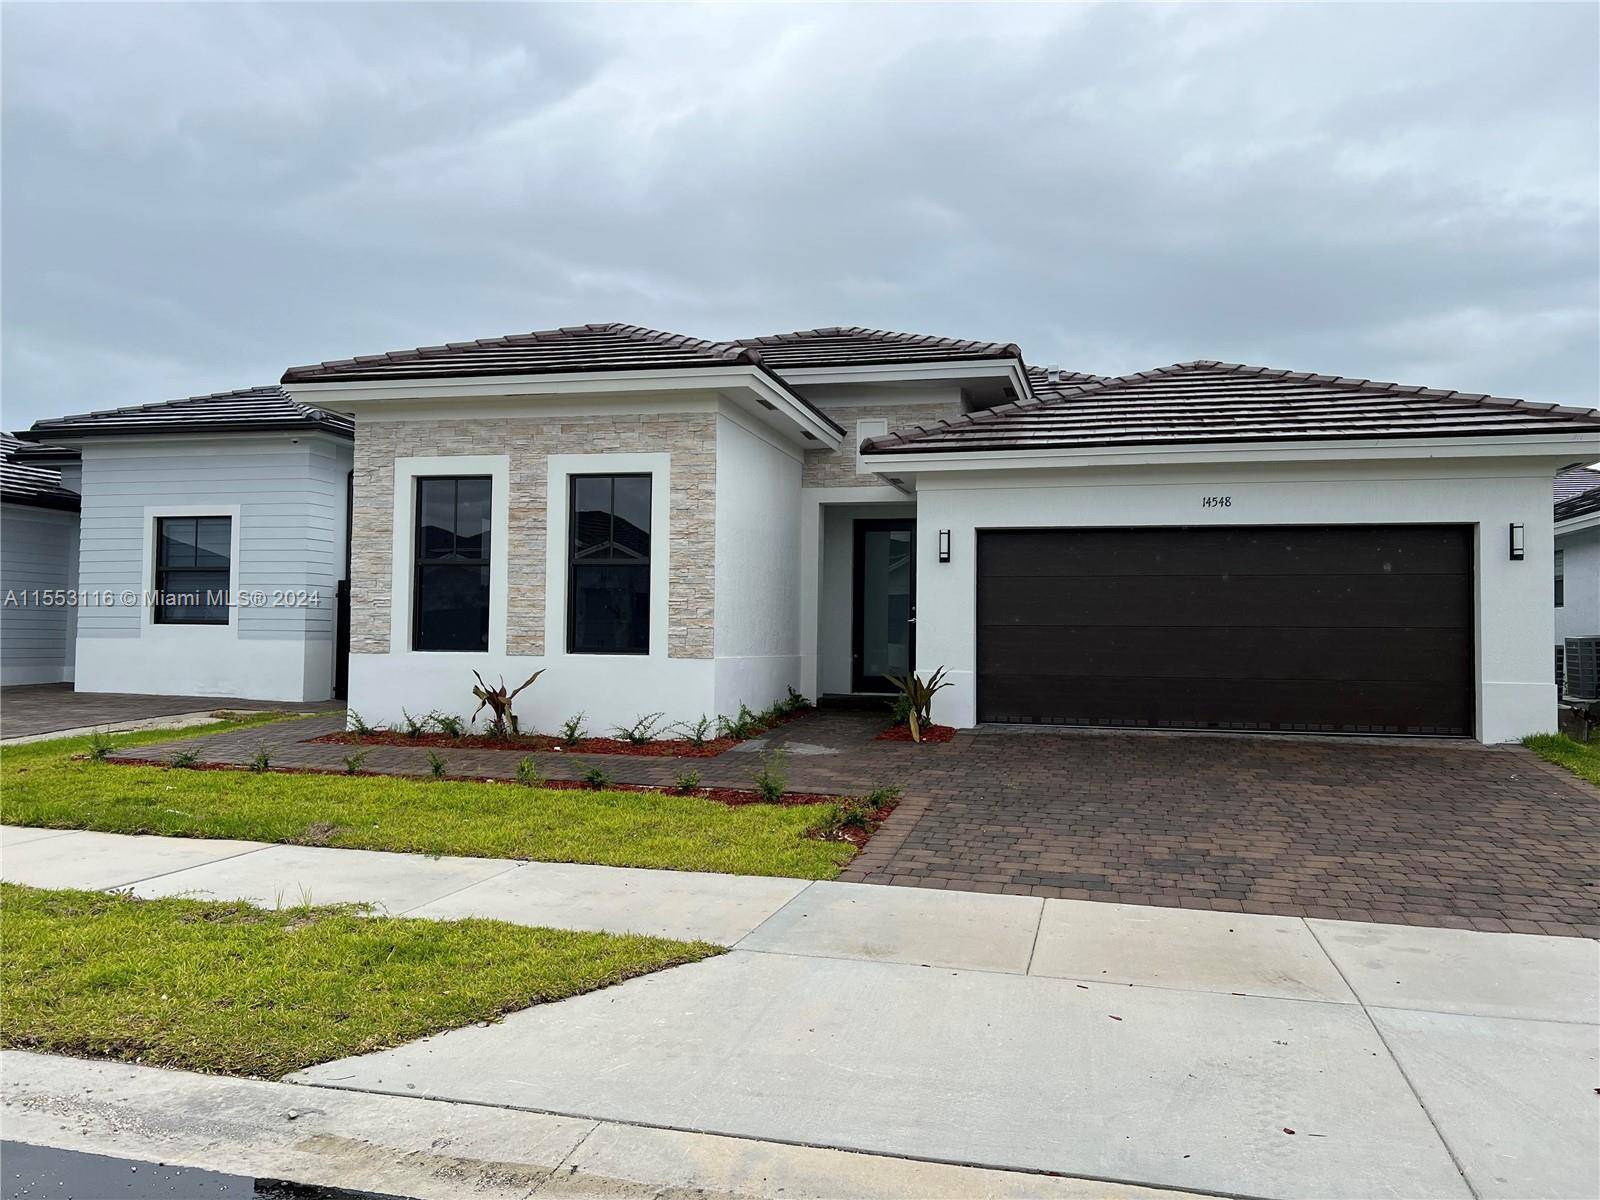 NEW CONSTRUCTION HOME. Home features 4 bedrooms 3 bath, In law suite with separate A C and private entrance, a modern kitchen, ceramic floors throughout, Walk In closets and TWO ...